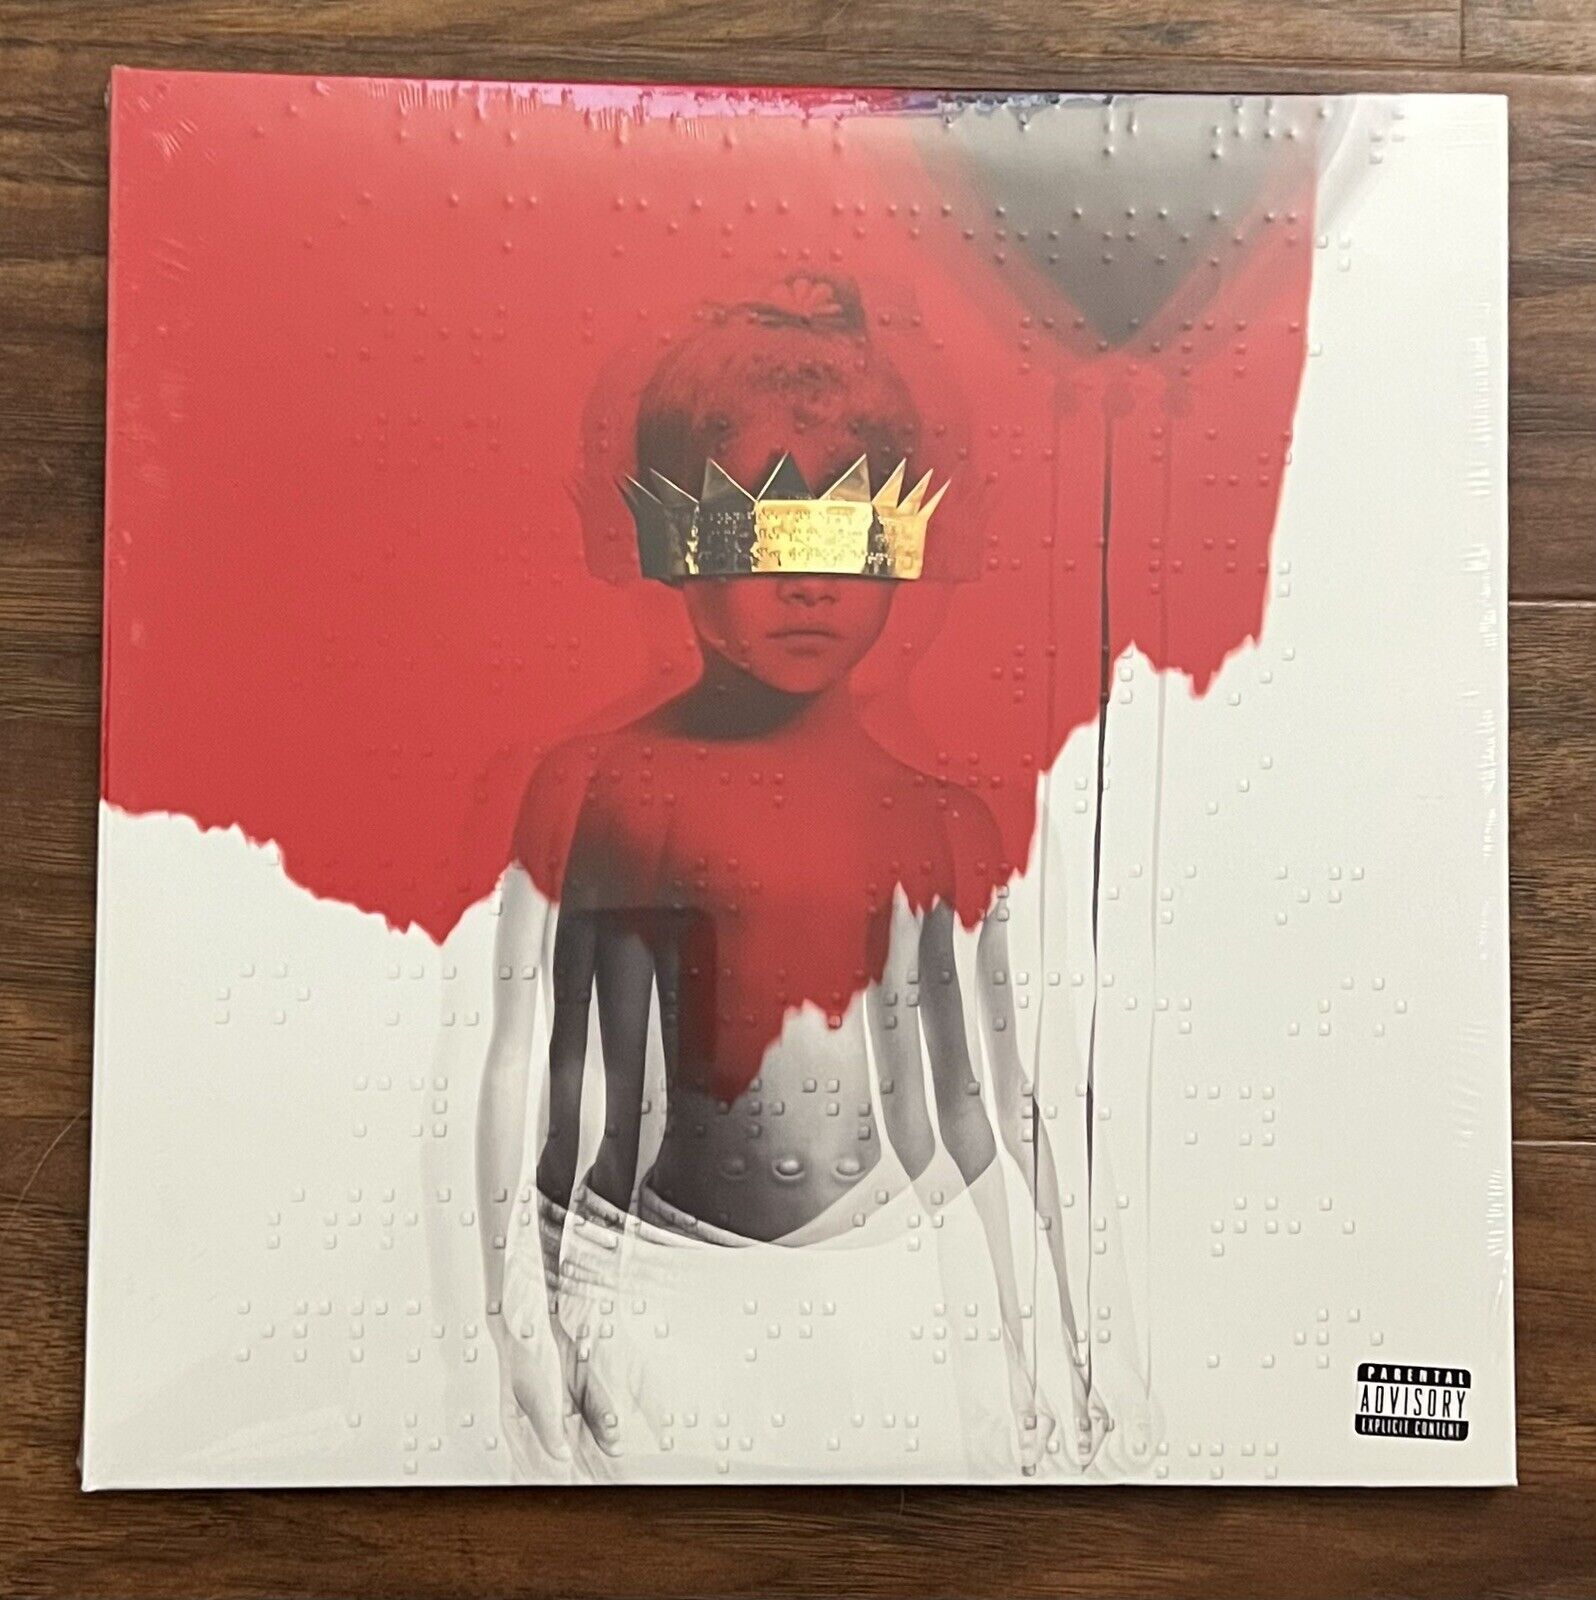 Rihanna - ANTI Vinyl 2LP Red Opaque Colored Record Limited uDiscover New/Sealed